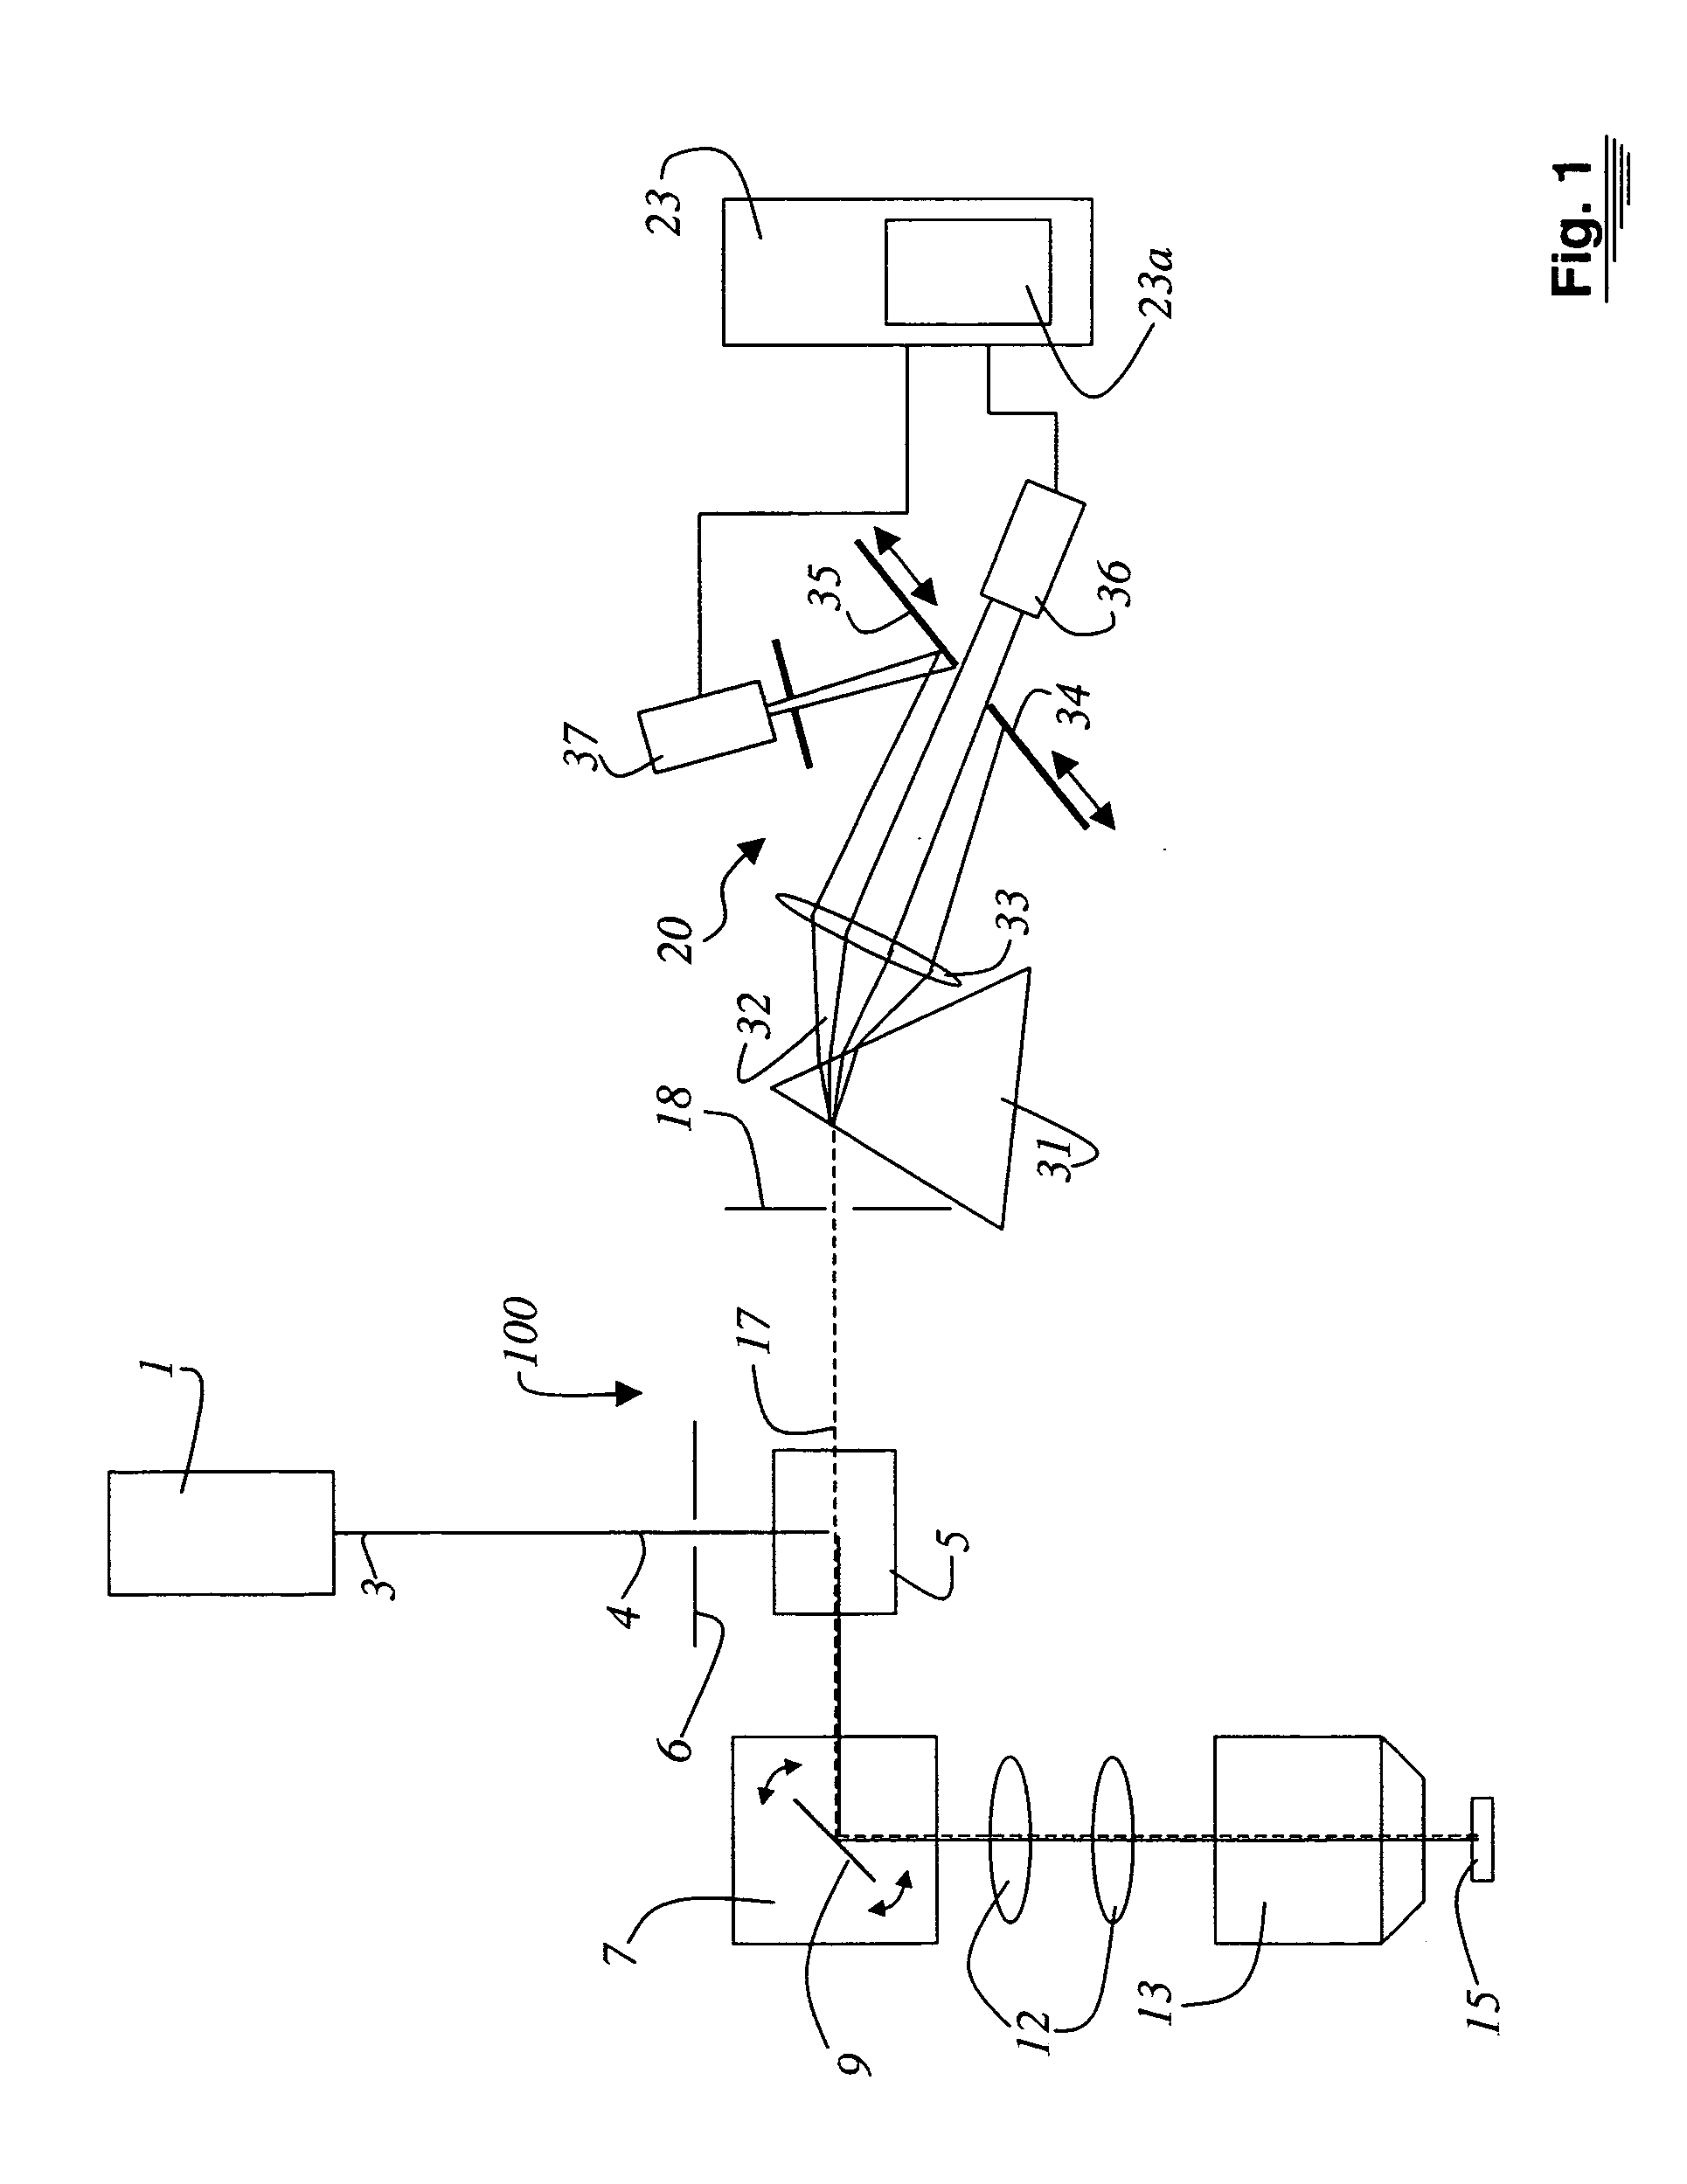 Method and system for the analysis of co-localizations